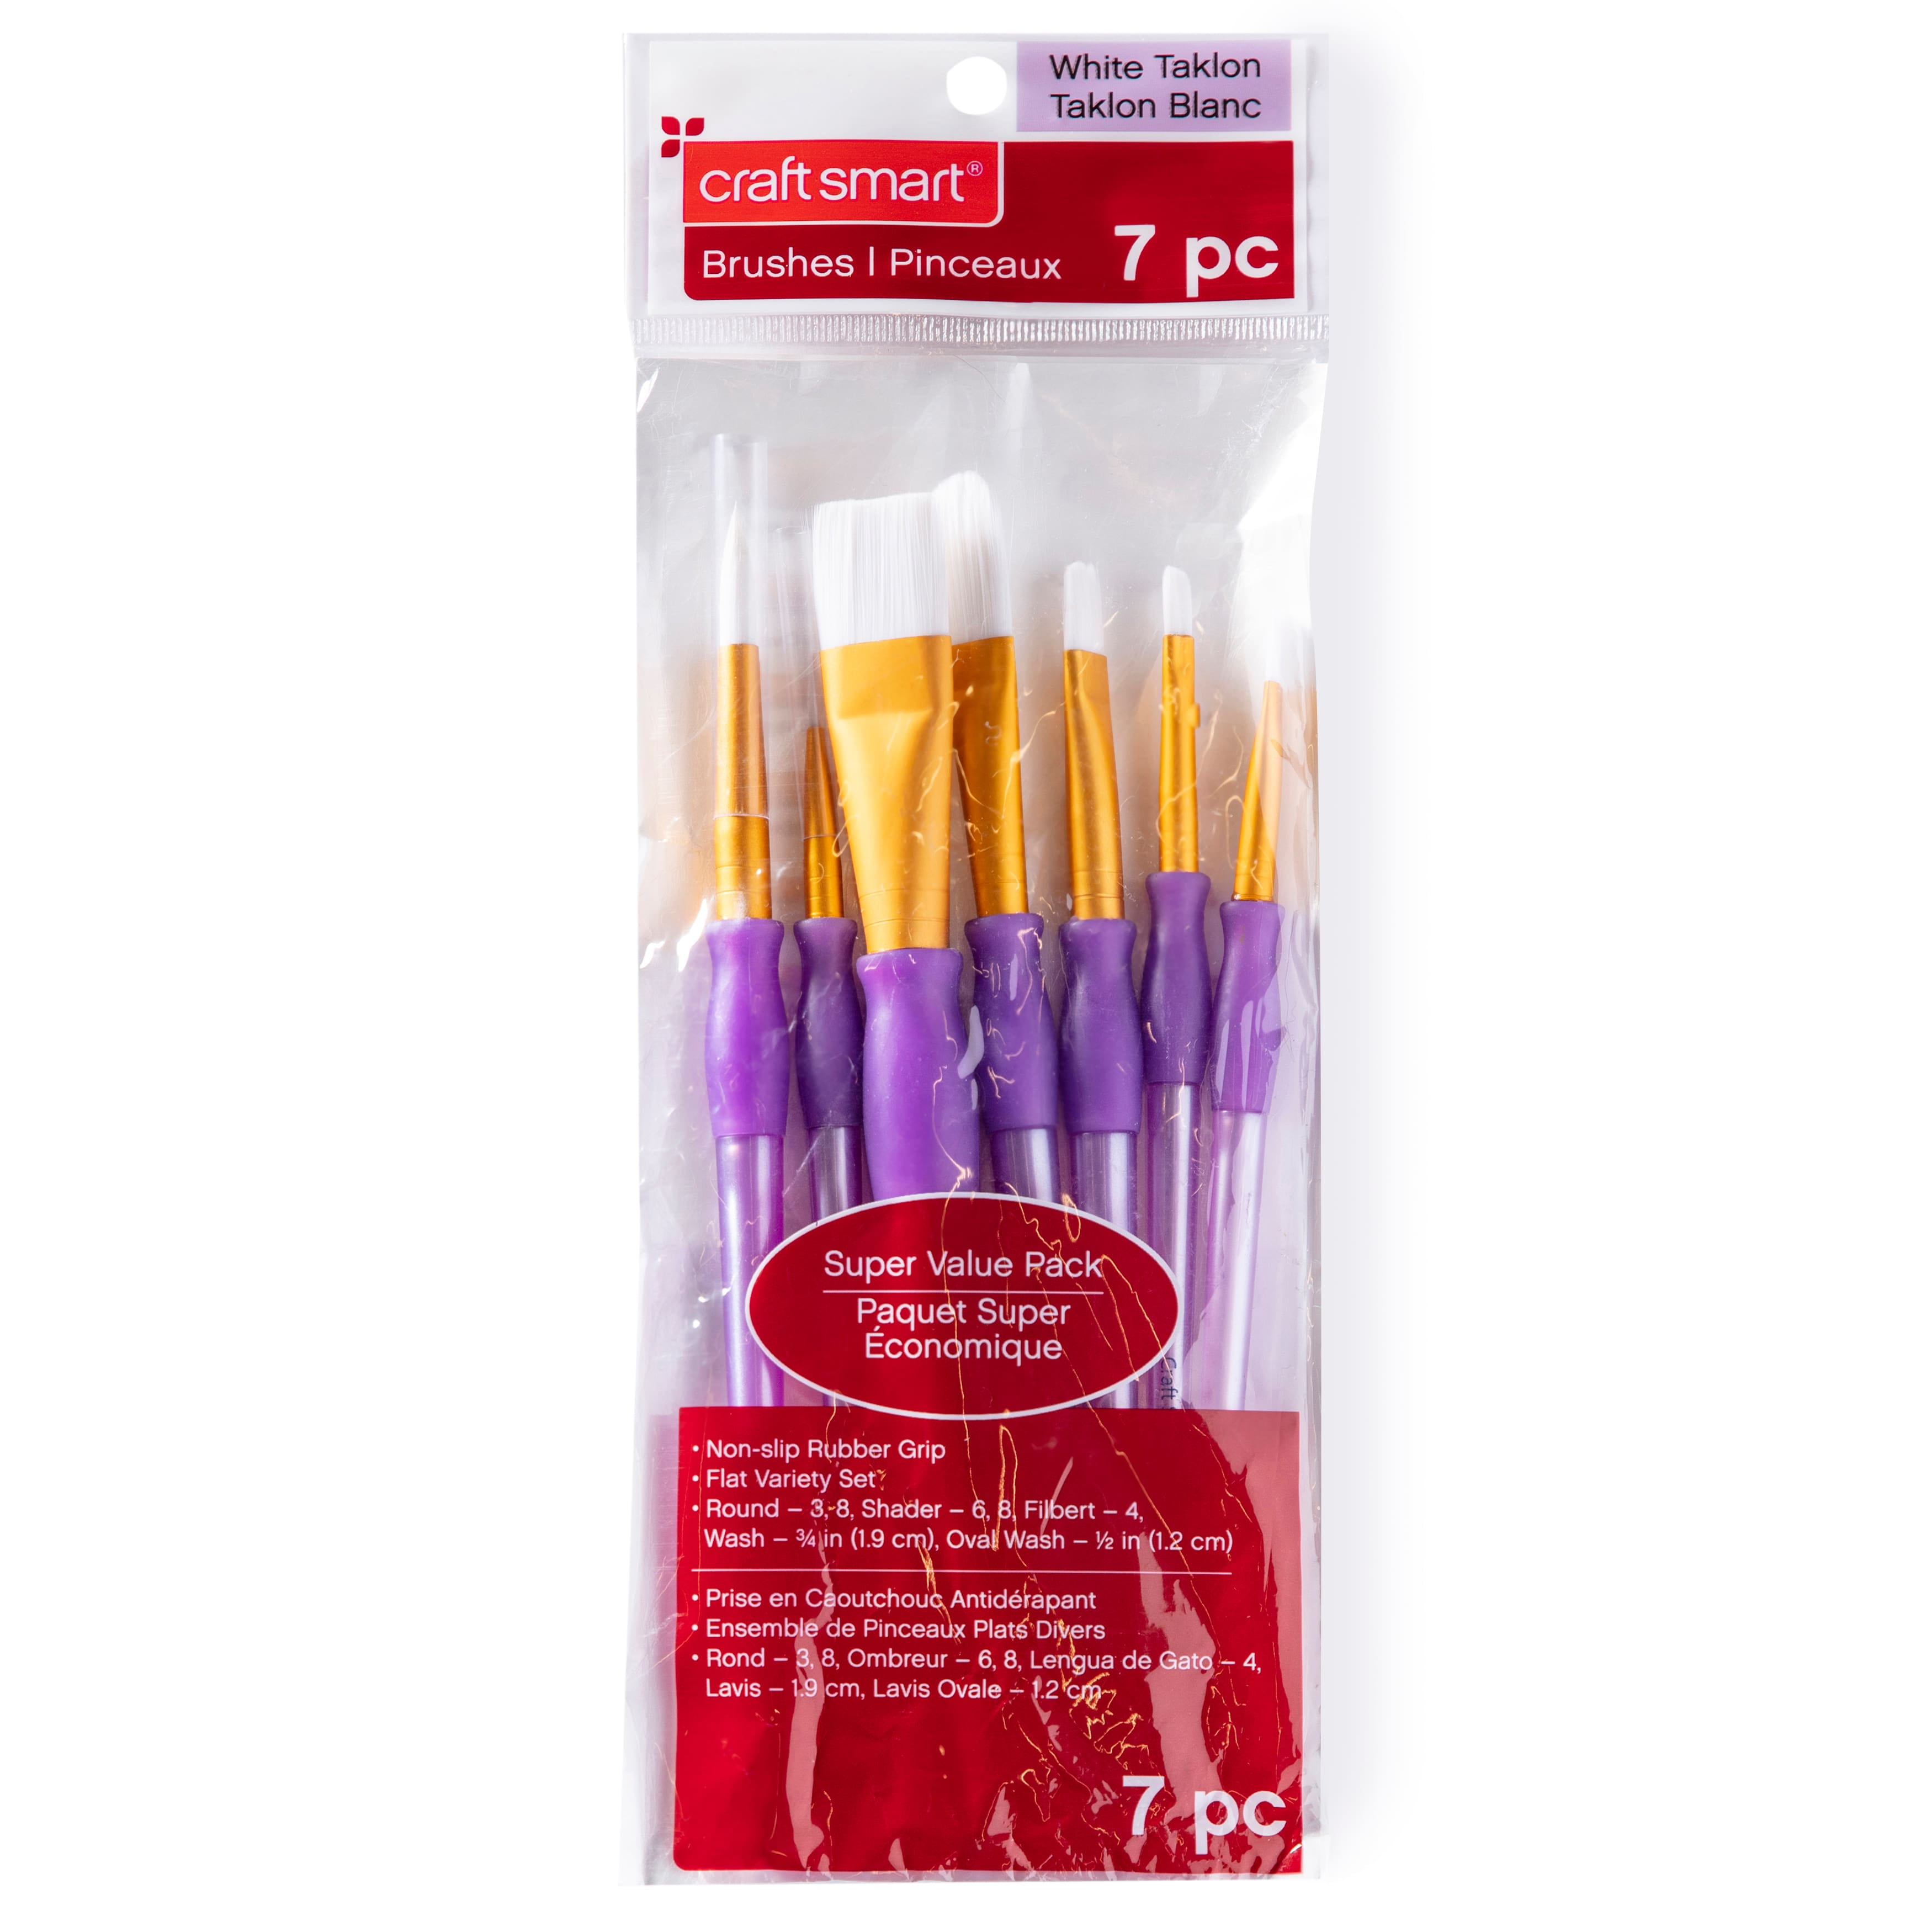 6 Piece Silicone Brush Set by Craft Smart®